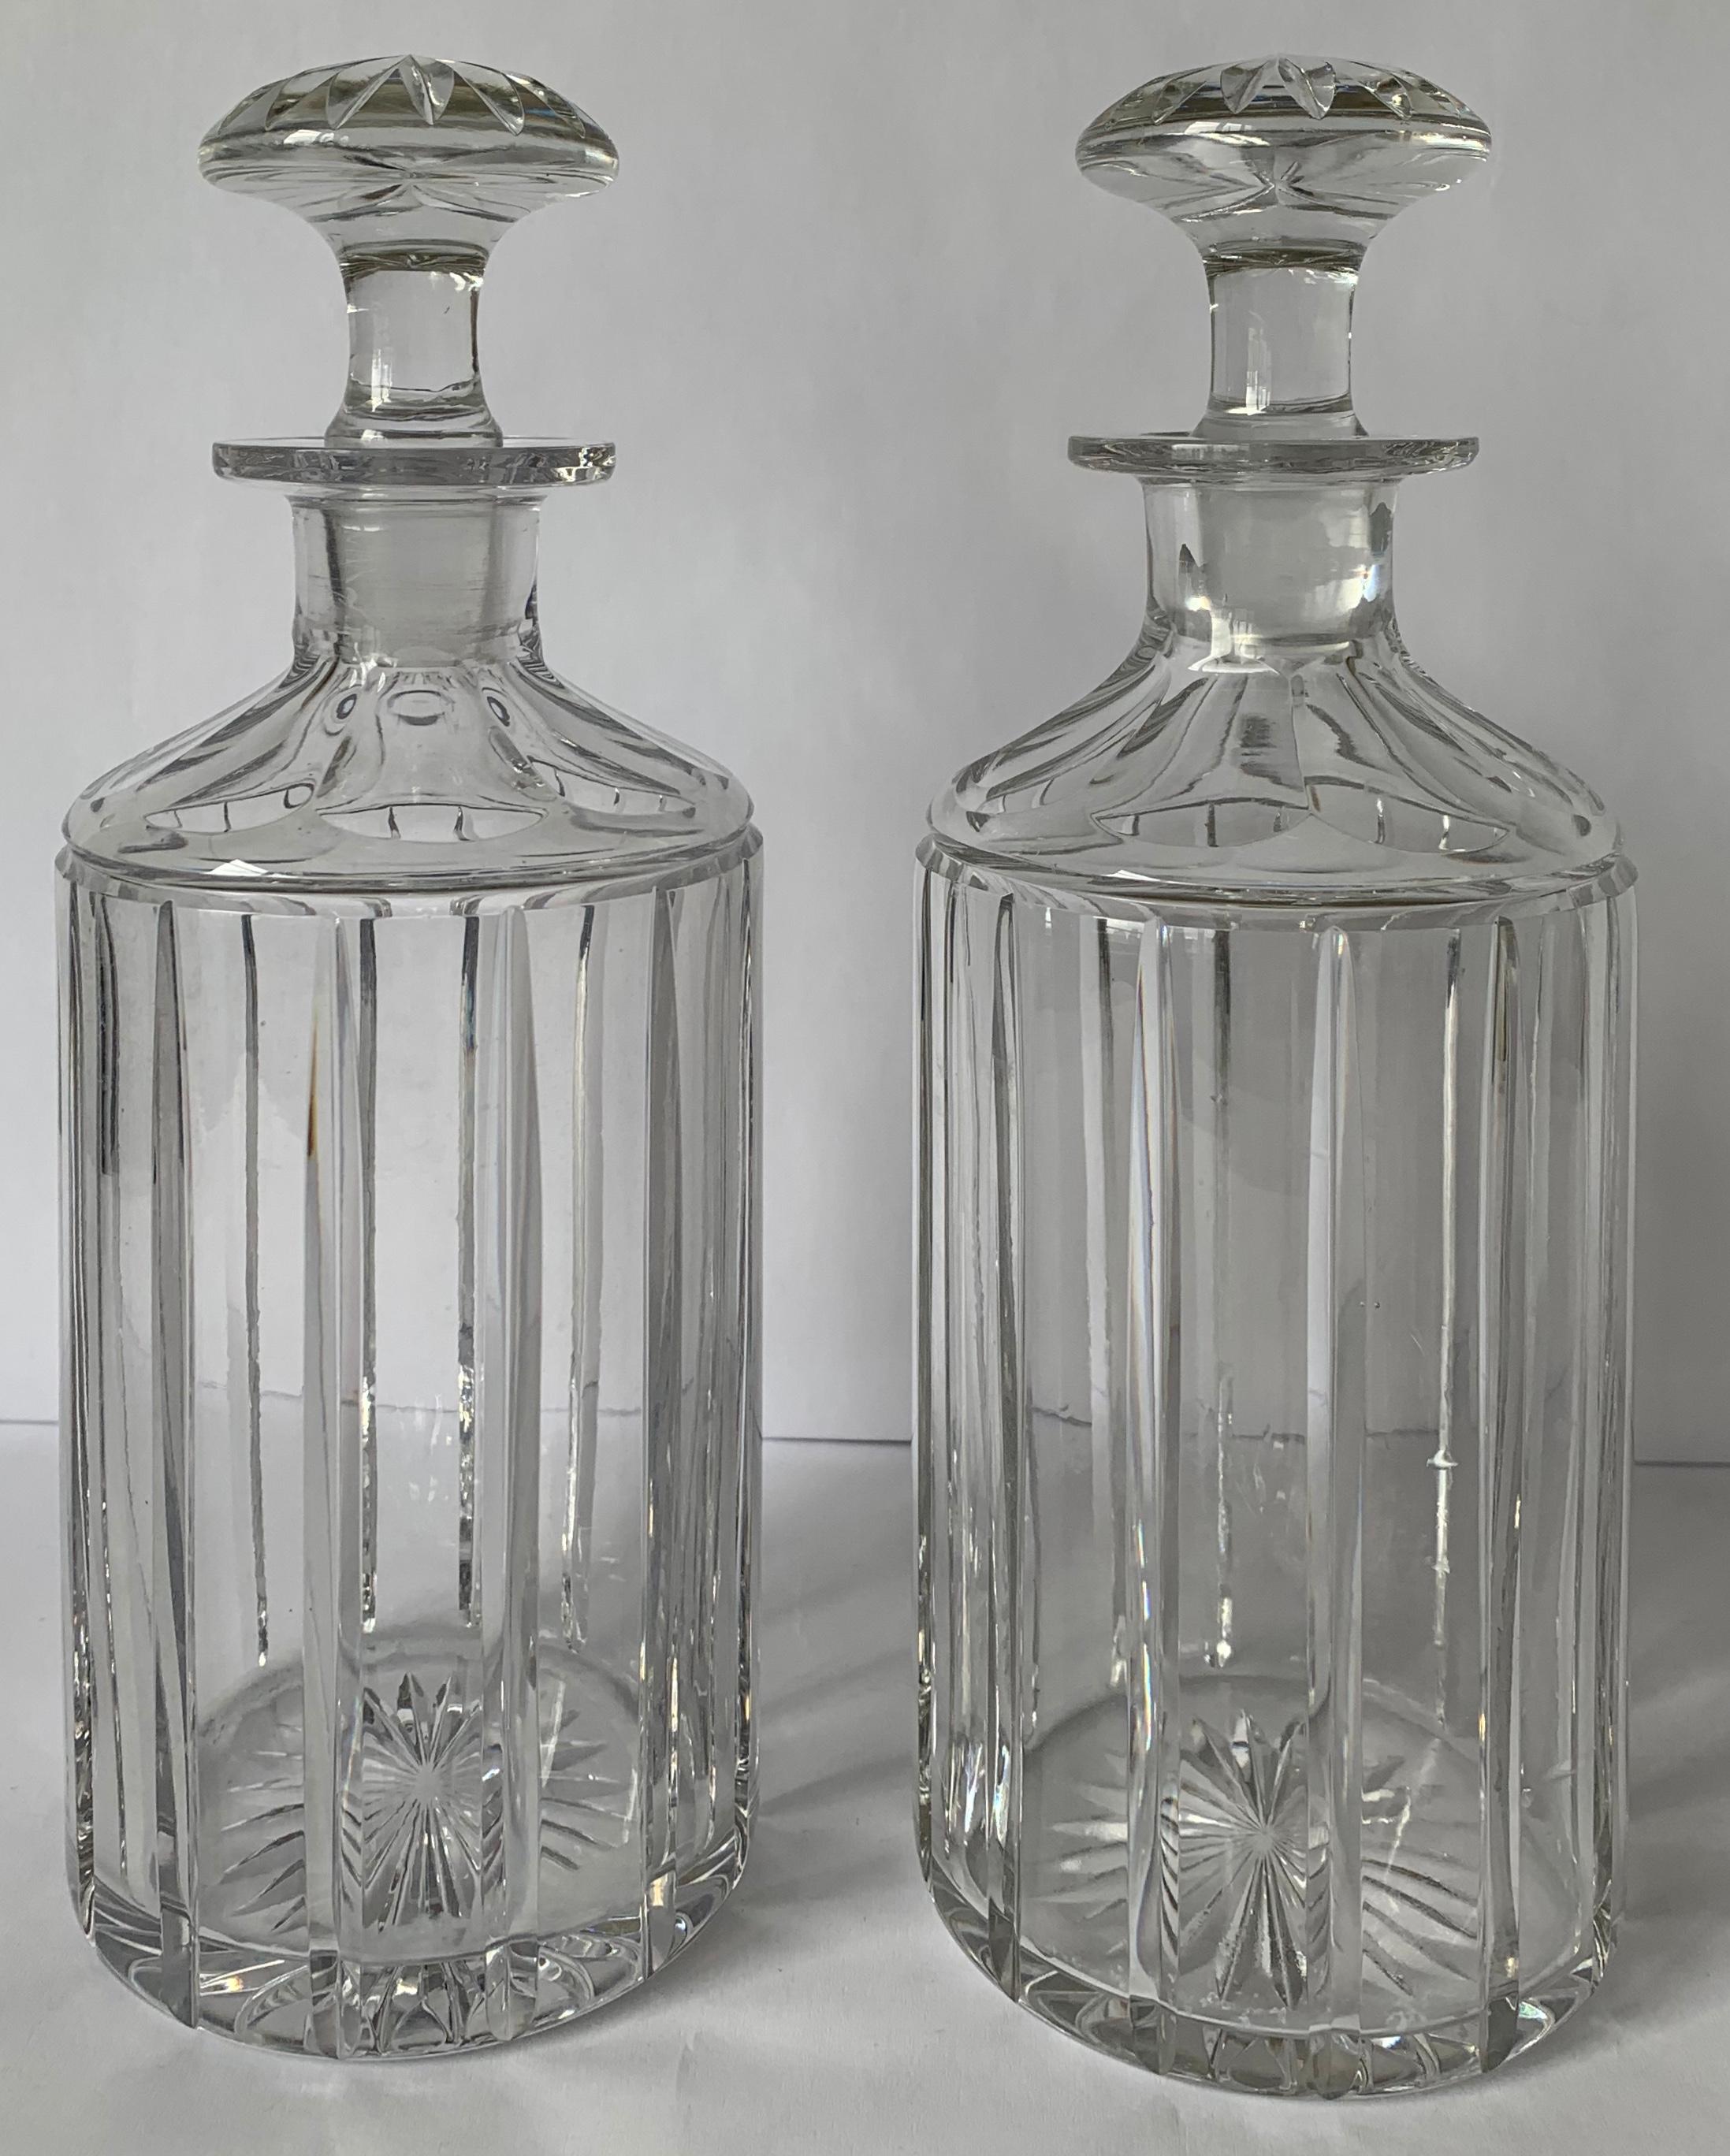 Pair of 1950s English cut glass decanters. No makers mark or signature.